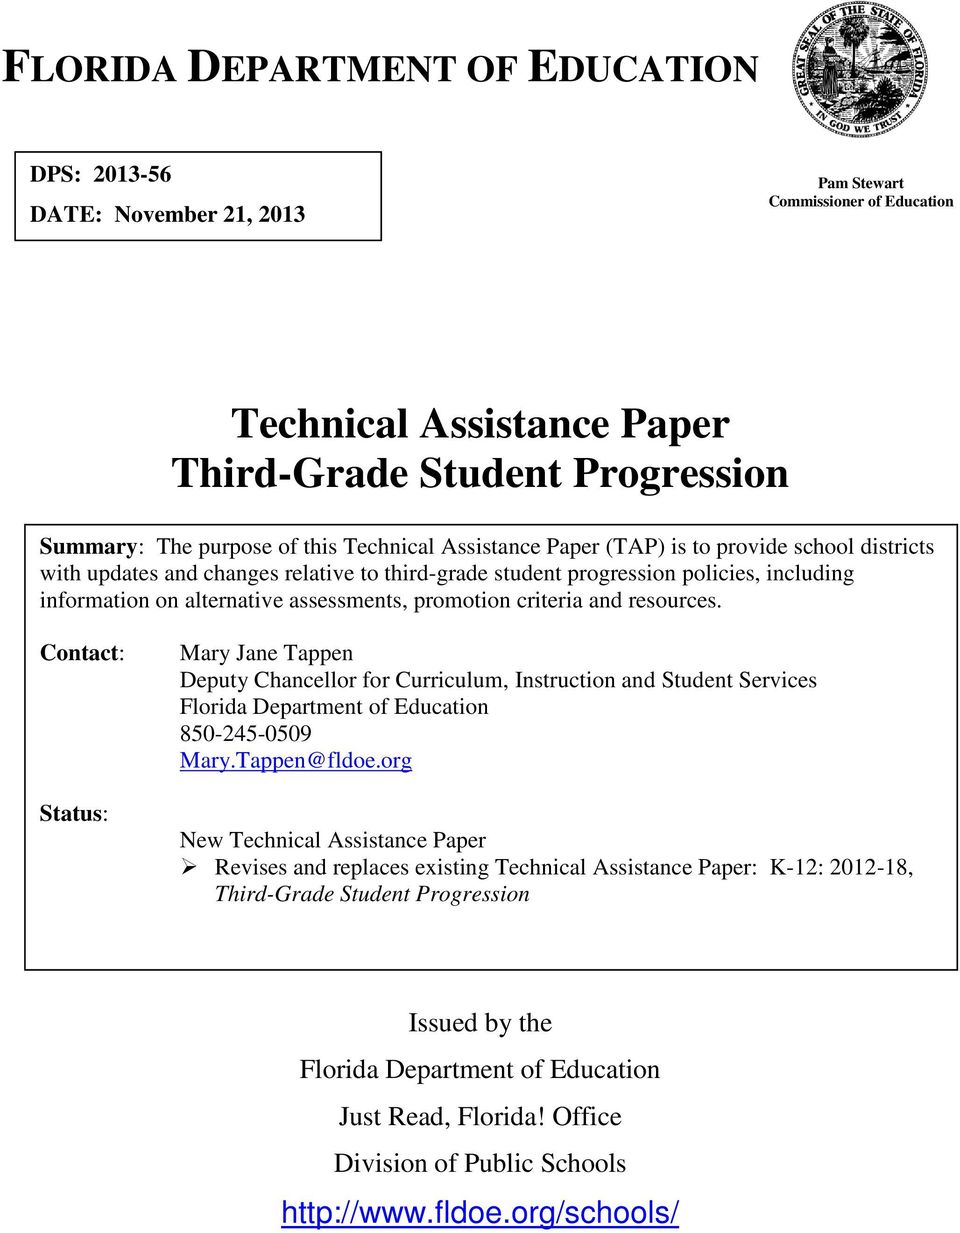 promotion criteria and resources. Contact: Status: Mary Jane Tappen Deputy Chancellor for Curriculum, Instruction and Student Services Florida Department of Education 850-245-0509 Mary.Tappen@fldoe.